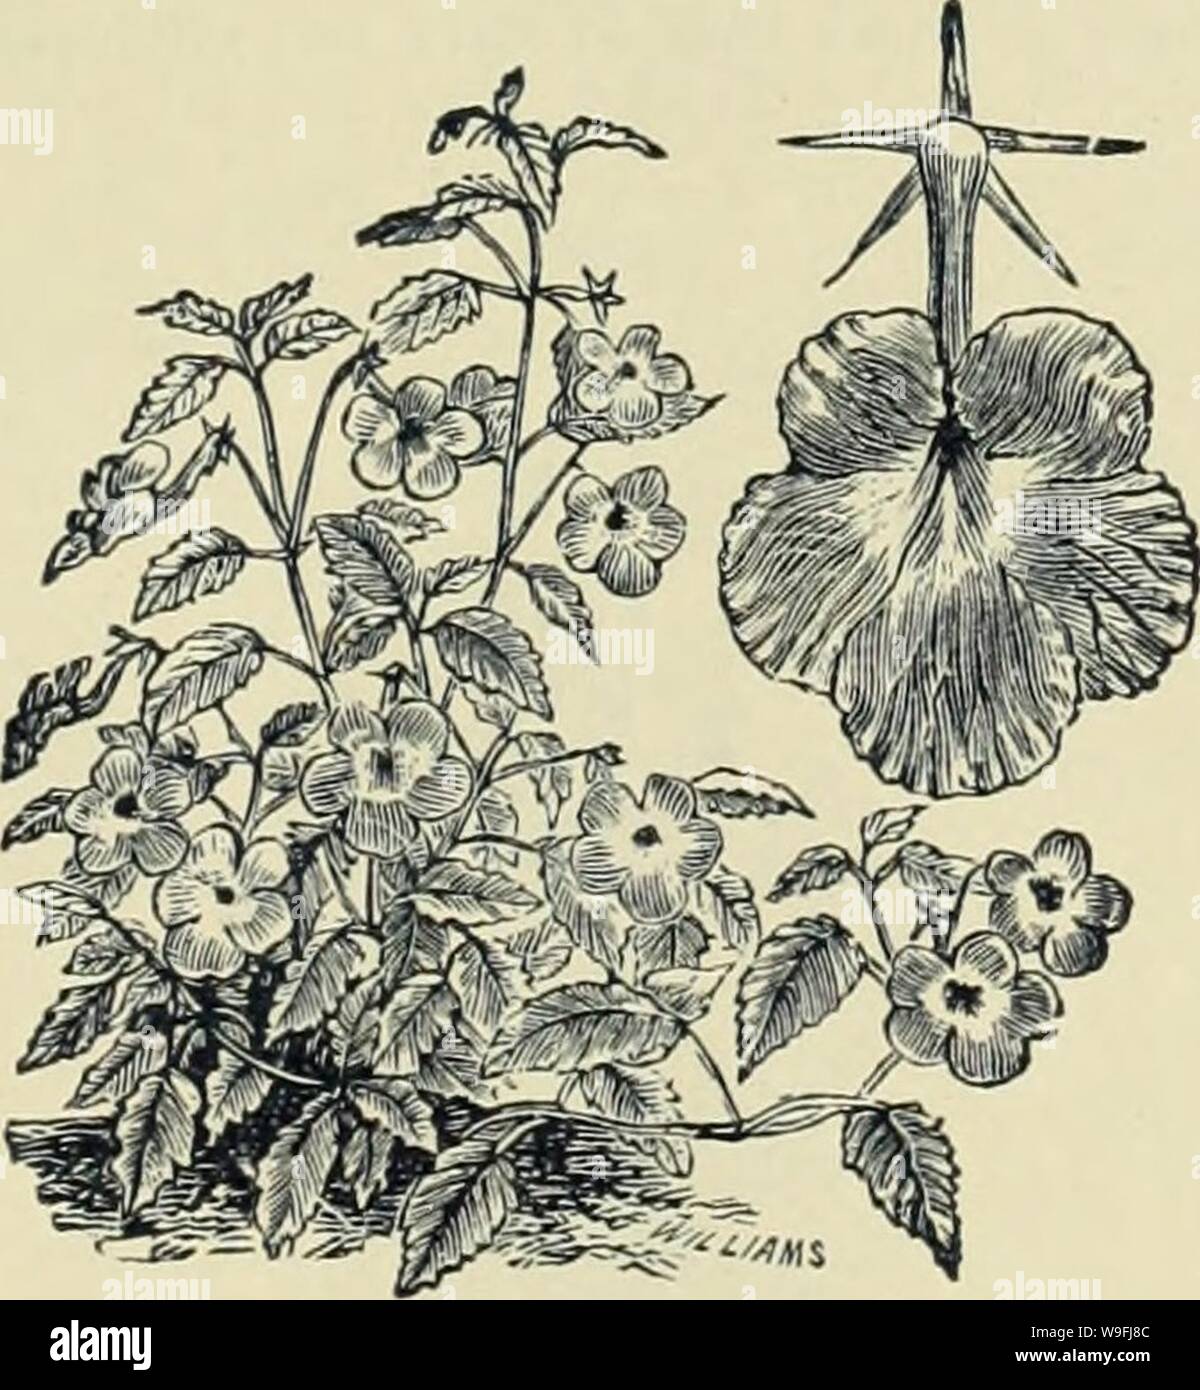 Archive image from page 46 of Currie Bros' horticultural guide . Currie Bros.' horticultural guide : spring 1888  curriebroshortic1888curr Year: 1888 ( ACROCLINUM. A beautiful everlasting flower, resembling the Rho- danthe, but larger. Cut the flowers for winter bouquets before they are fully open. Half-hardy annuals. Album—Pure white, 1 foot 5 Roseum—Bright rose, 1 foot 5 Roseum fl. pi.—Double rose, 1 foot 10 Album fl. pi.—Double white, 1 foot 10 3 ABRONIA. Pretty little plants, resembling the Verbena in their style of growth The flowers are very fragrant, and especially so in the evening Hal Stock Photo